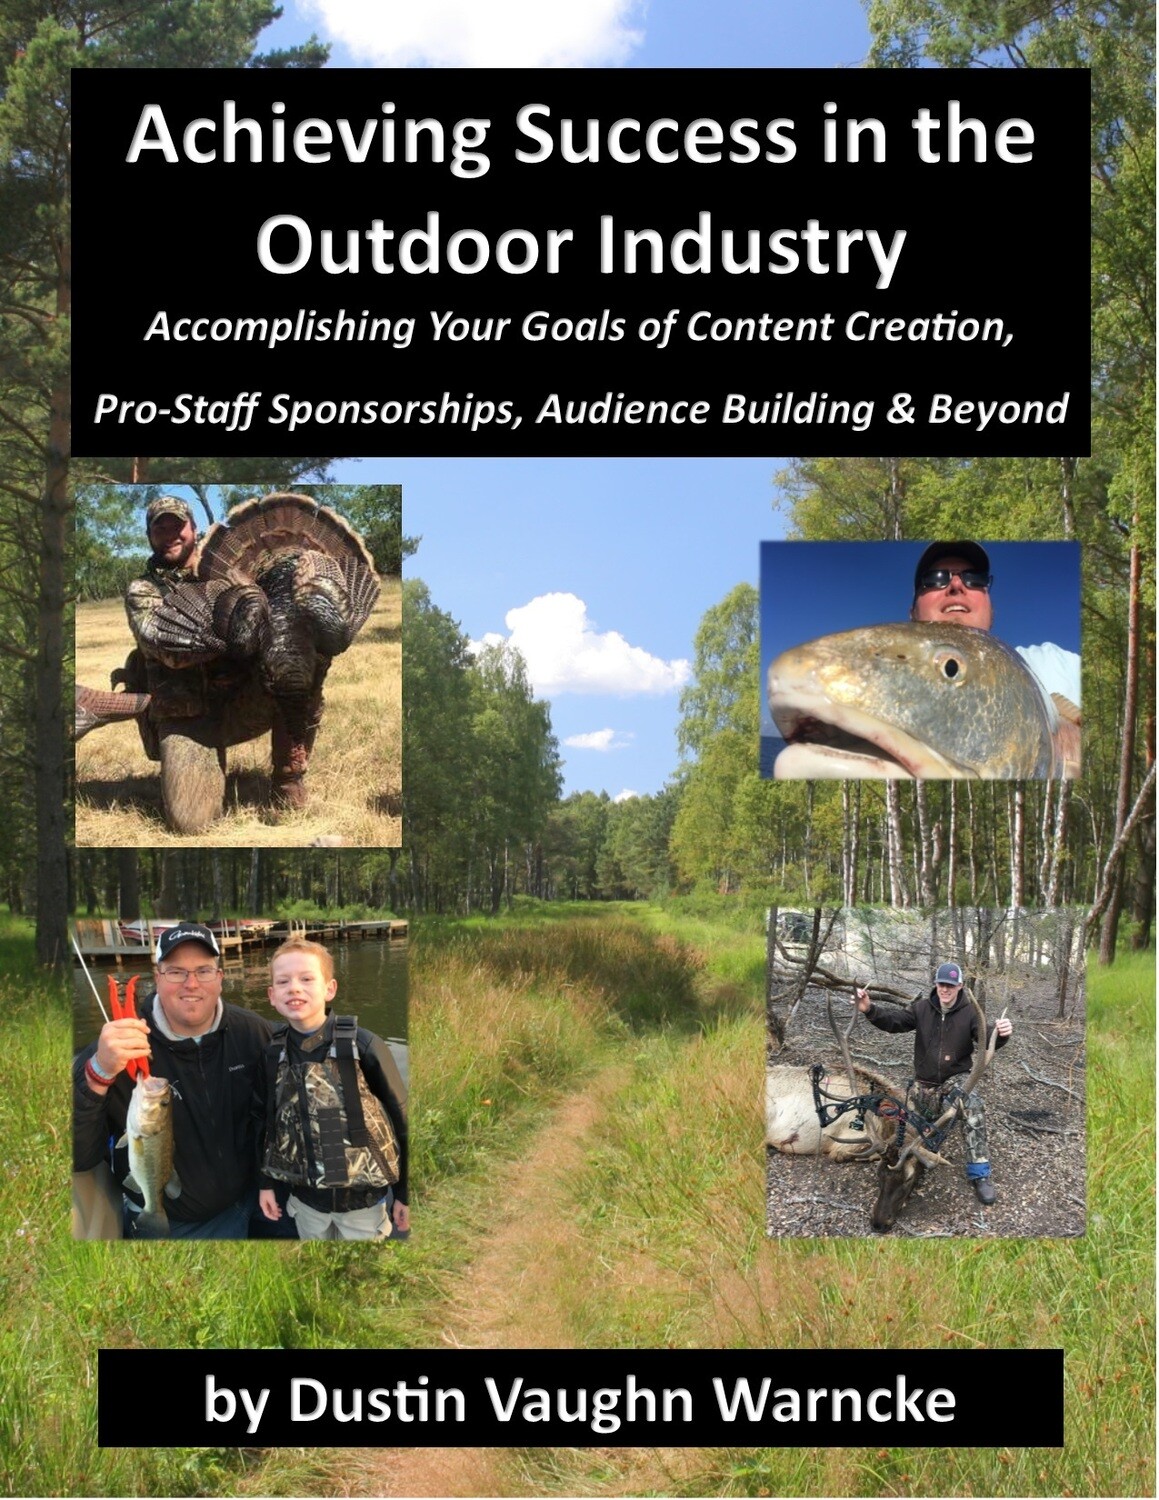 Achieving Success in the Outdoor Industry eBook